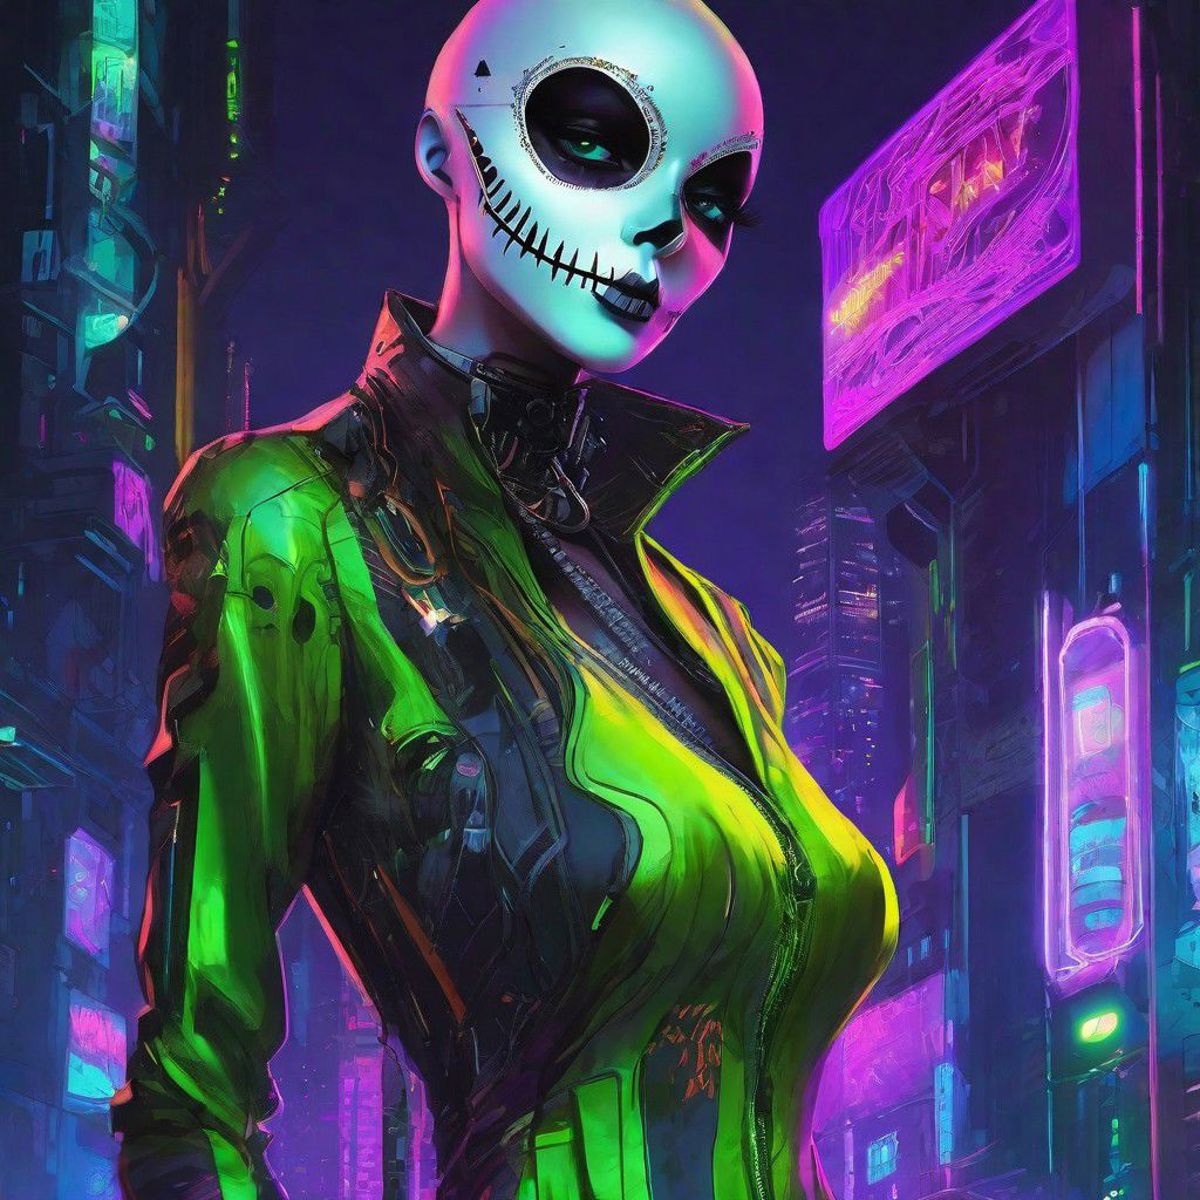 A woman in a green outfit with a skull face and a bustier.